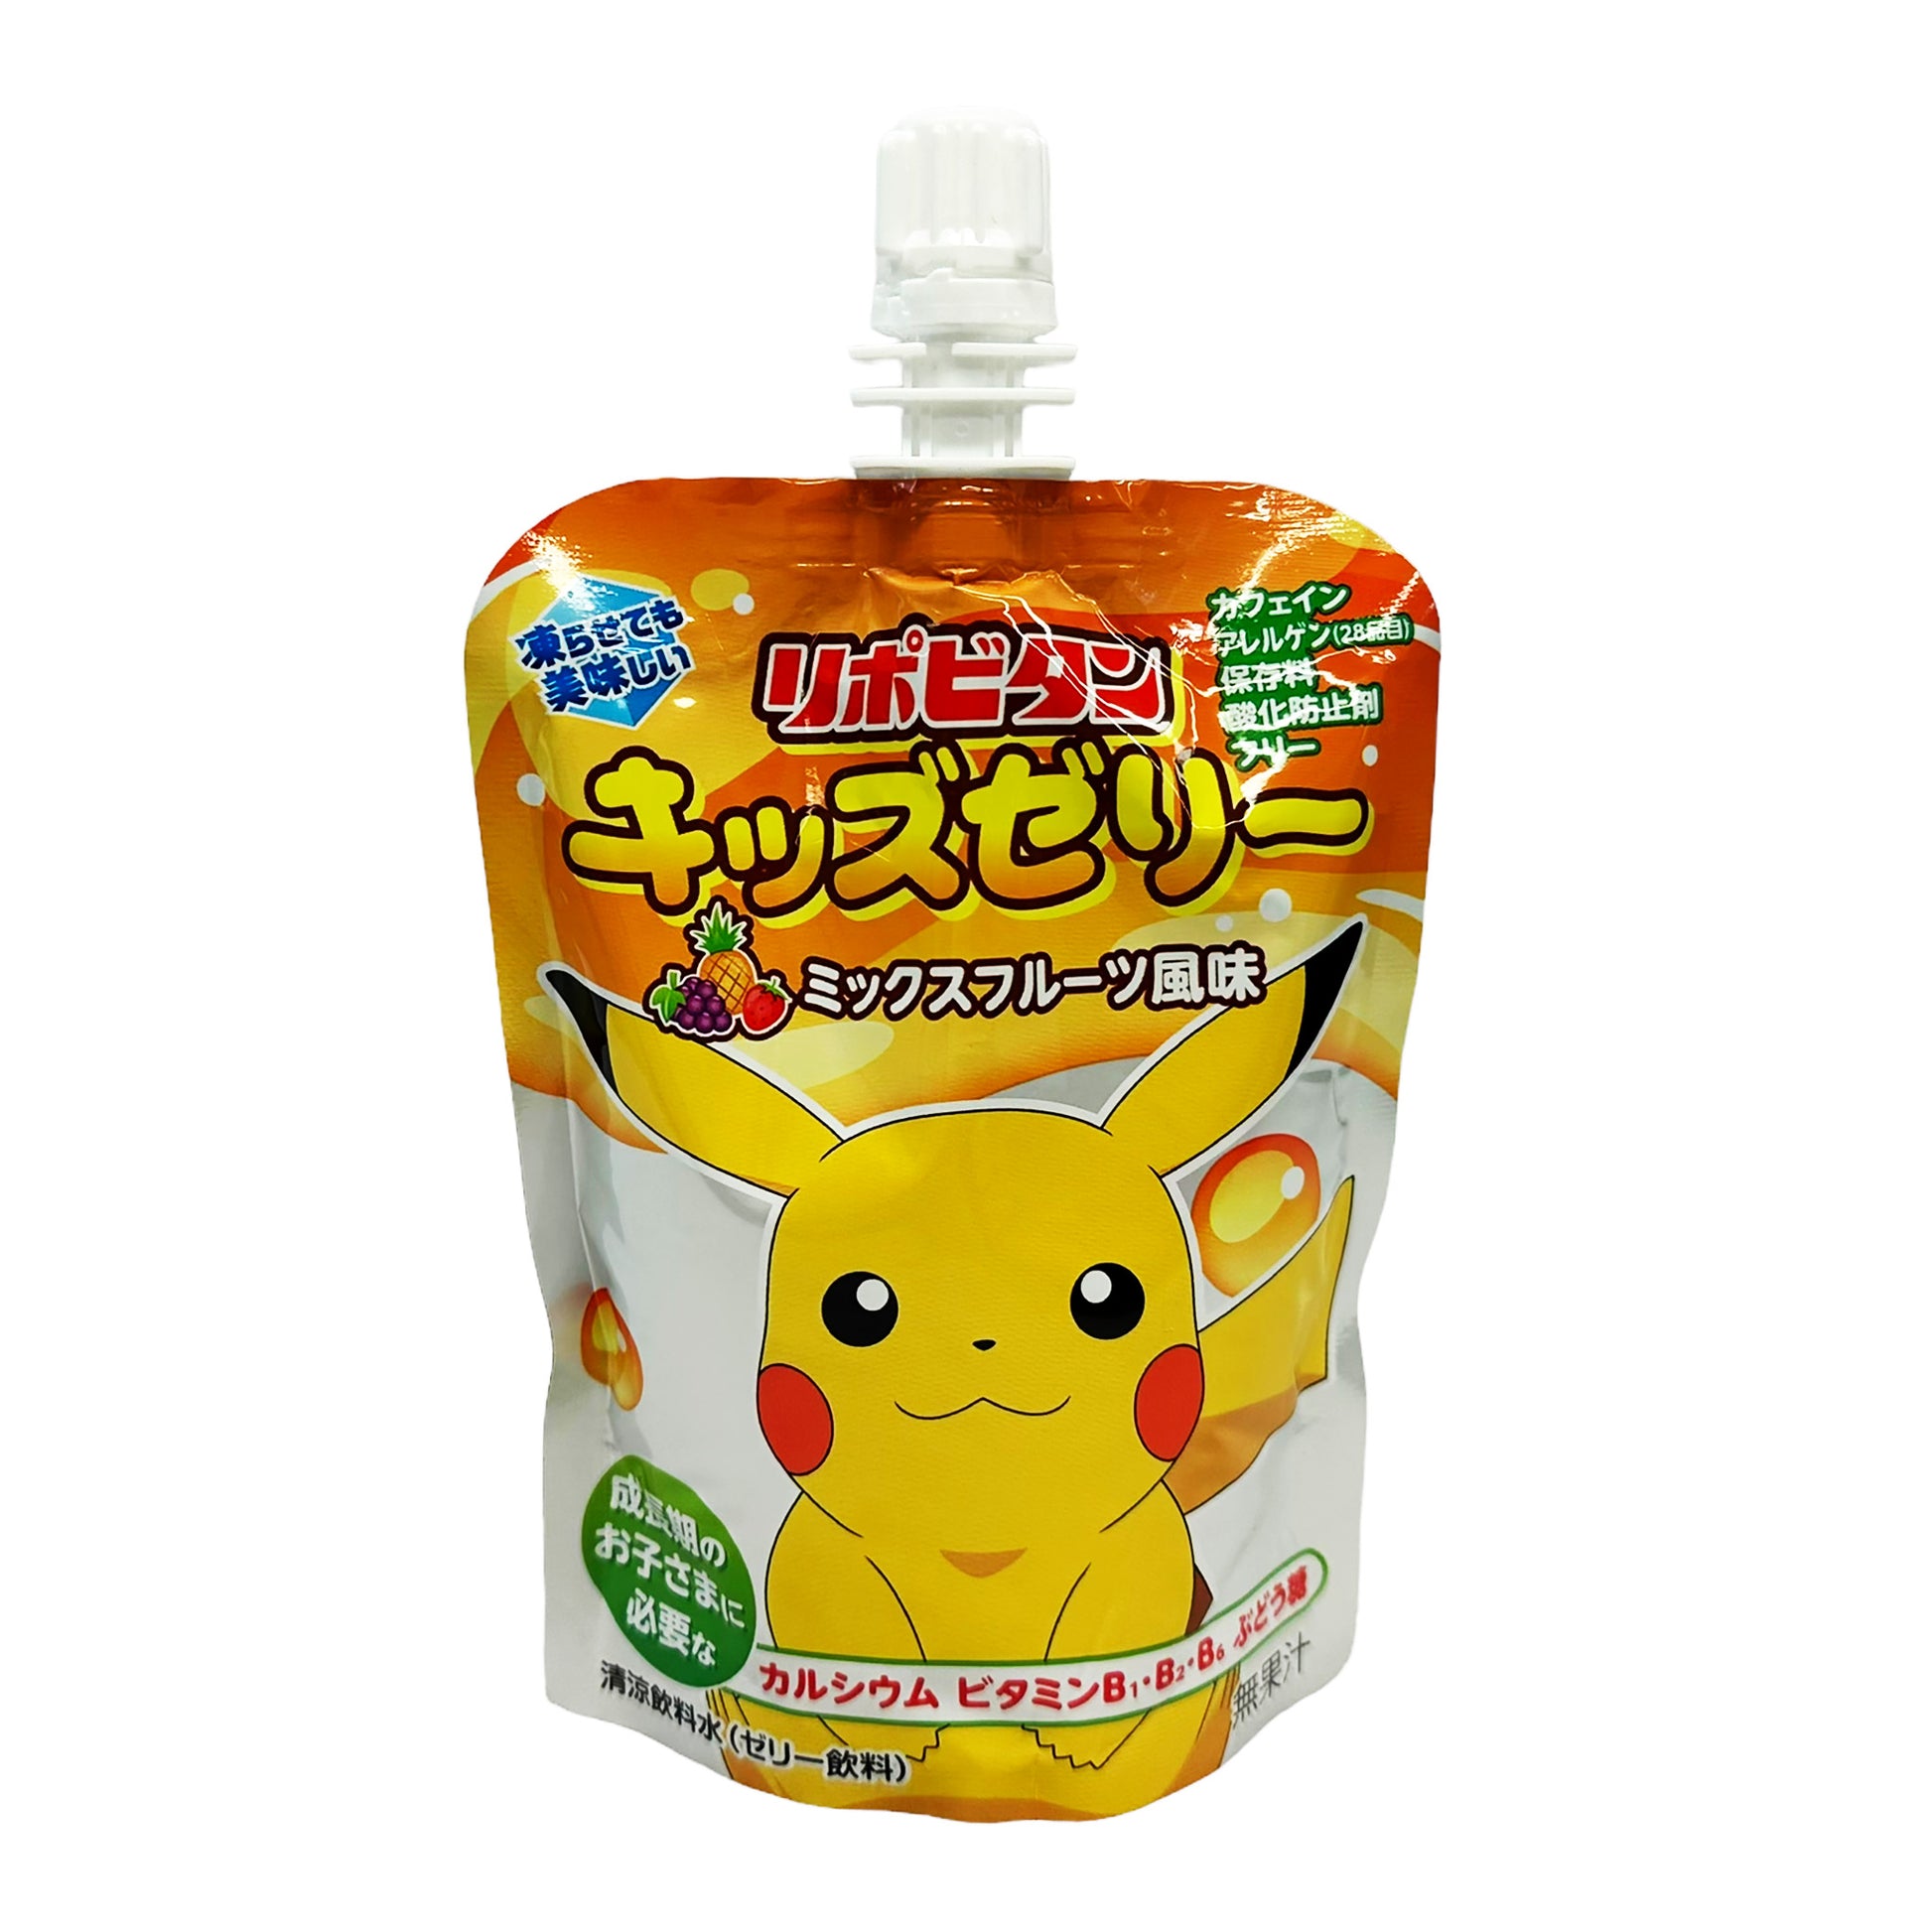 Front graphic image 4 of Taisho Pokemon Jelly Drink - Mixed Fruits 4.4oz (125g)